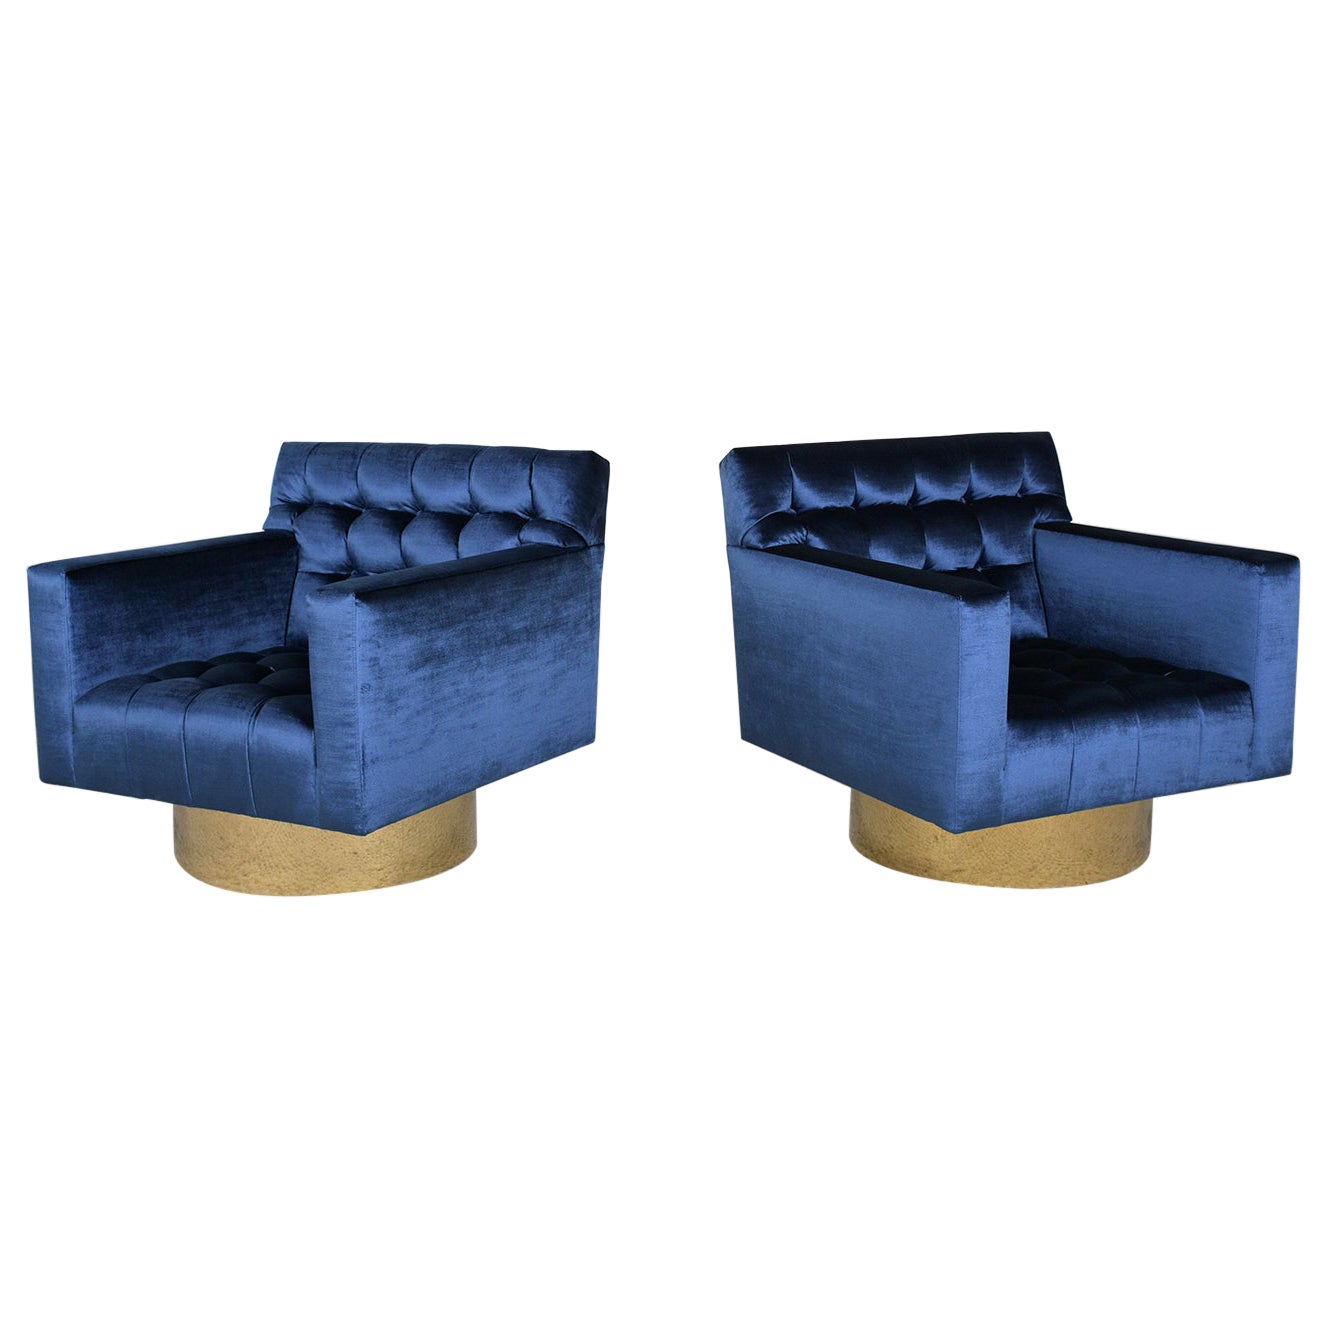 Pair of Upholstery Swivel Lounge Chairs